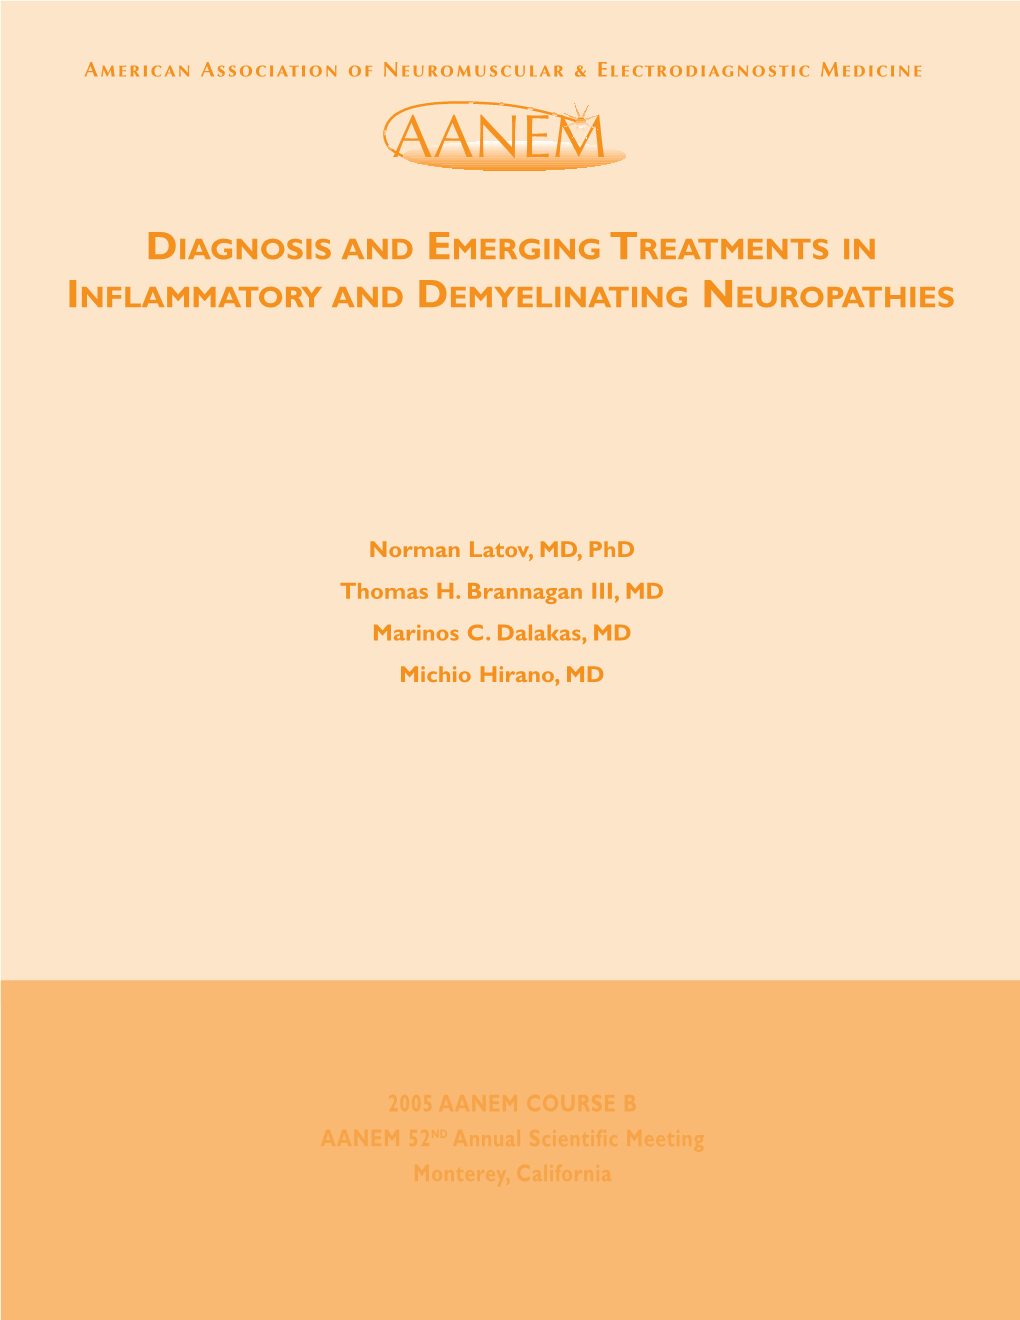 Diagnosis and Emerging Treatments in Inflammatory and Demyelinating Neuropathies